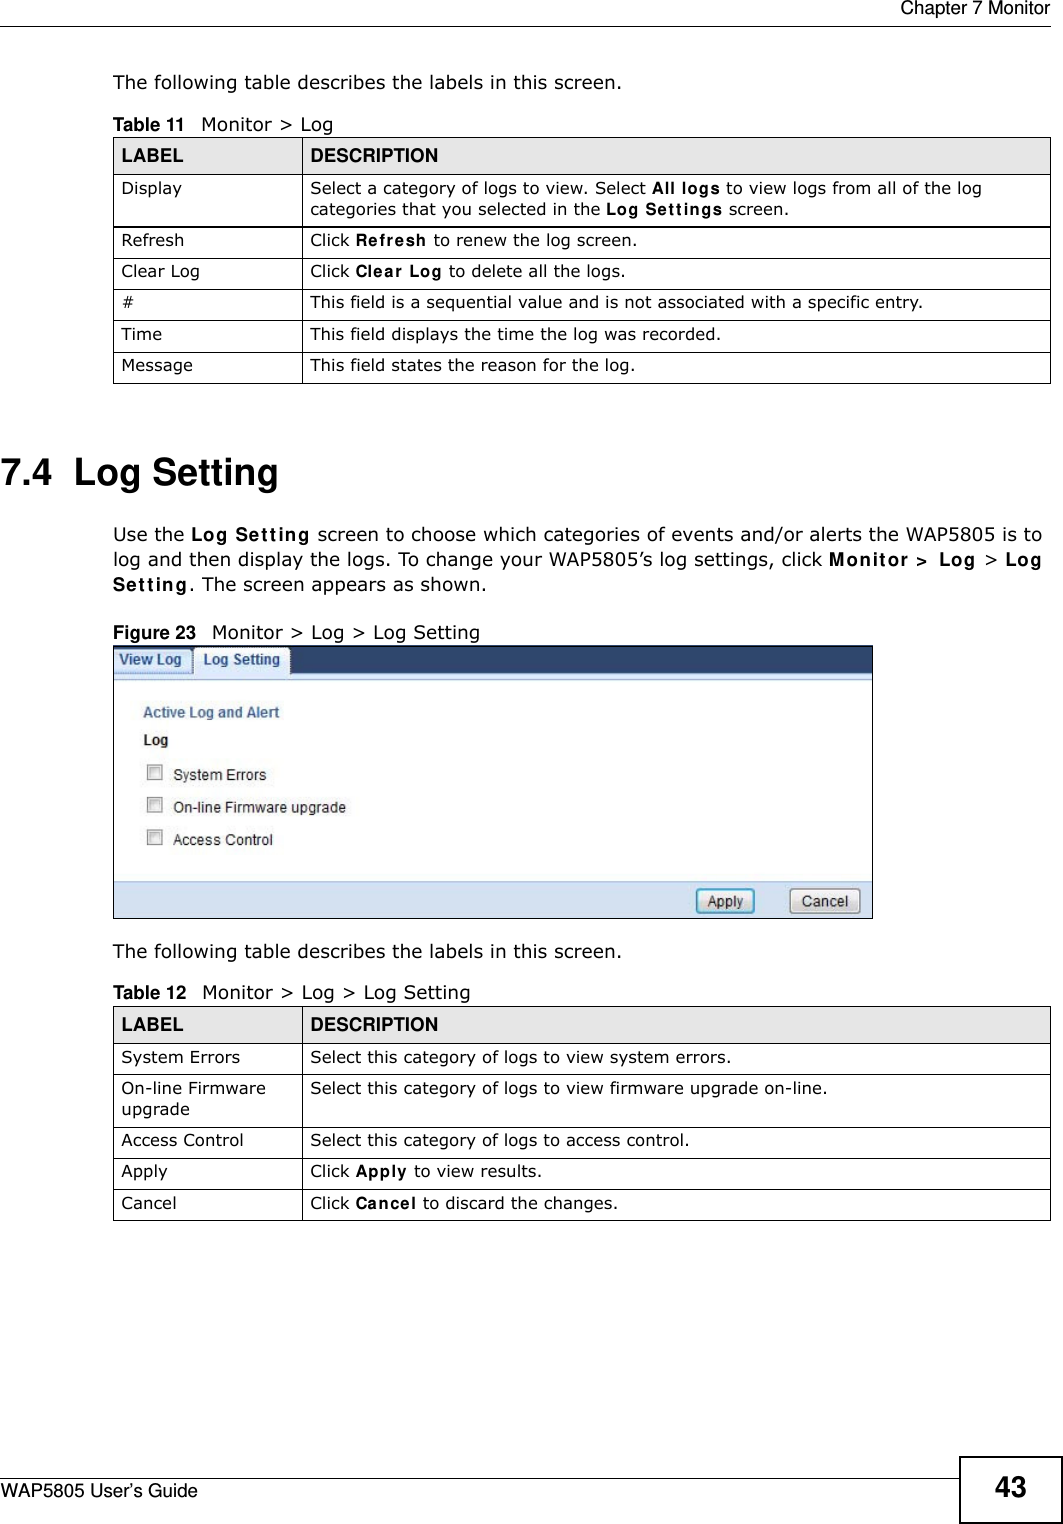  Chapter 7 MonitorWAP5805 User’s Guide 43The following table describes the labels in this screen. 7.4  Log Setting Use the Log Setting screen to choose which categories of events and/or alerts the WAP5805 is to log and then display the logs. To change your WAP5805’s log settings, click Monitor &gt; Log &gt; Log Setting. The screen appears as shown.Figure 23   Monitor &gt; Log &gt; Log SettingThe following table describes the labels in this screen. Table 11   Monitor &gt; LogLABEL DESCRIPTIONDisplay  Select a category of logs to view. Select All logs to view logs from all of the log categories that you selected in the Log Settings screen.Refresh Click Refresh to renew the log screen. Clear Log Click Clear Log to delete all the logs. #This field is a sequential value and is not associated with a specific entry.Time  This field displays the time the log was recorded. Message This field states the reason for the log.Table 12   Monitor &gt; Log &gt; Log SettingLABEL DESCRIPTIONSystem Errors  Select this category of logs to view system errors.On-line Firmware upgradeSelect this category of logs to view firmware upgrade on-line.Access Control Select this category of logs to access control.Apply Click Apply to view results.Cancel  Click Cancel to discard the changes.